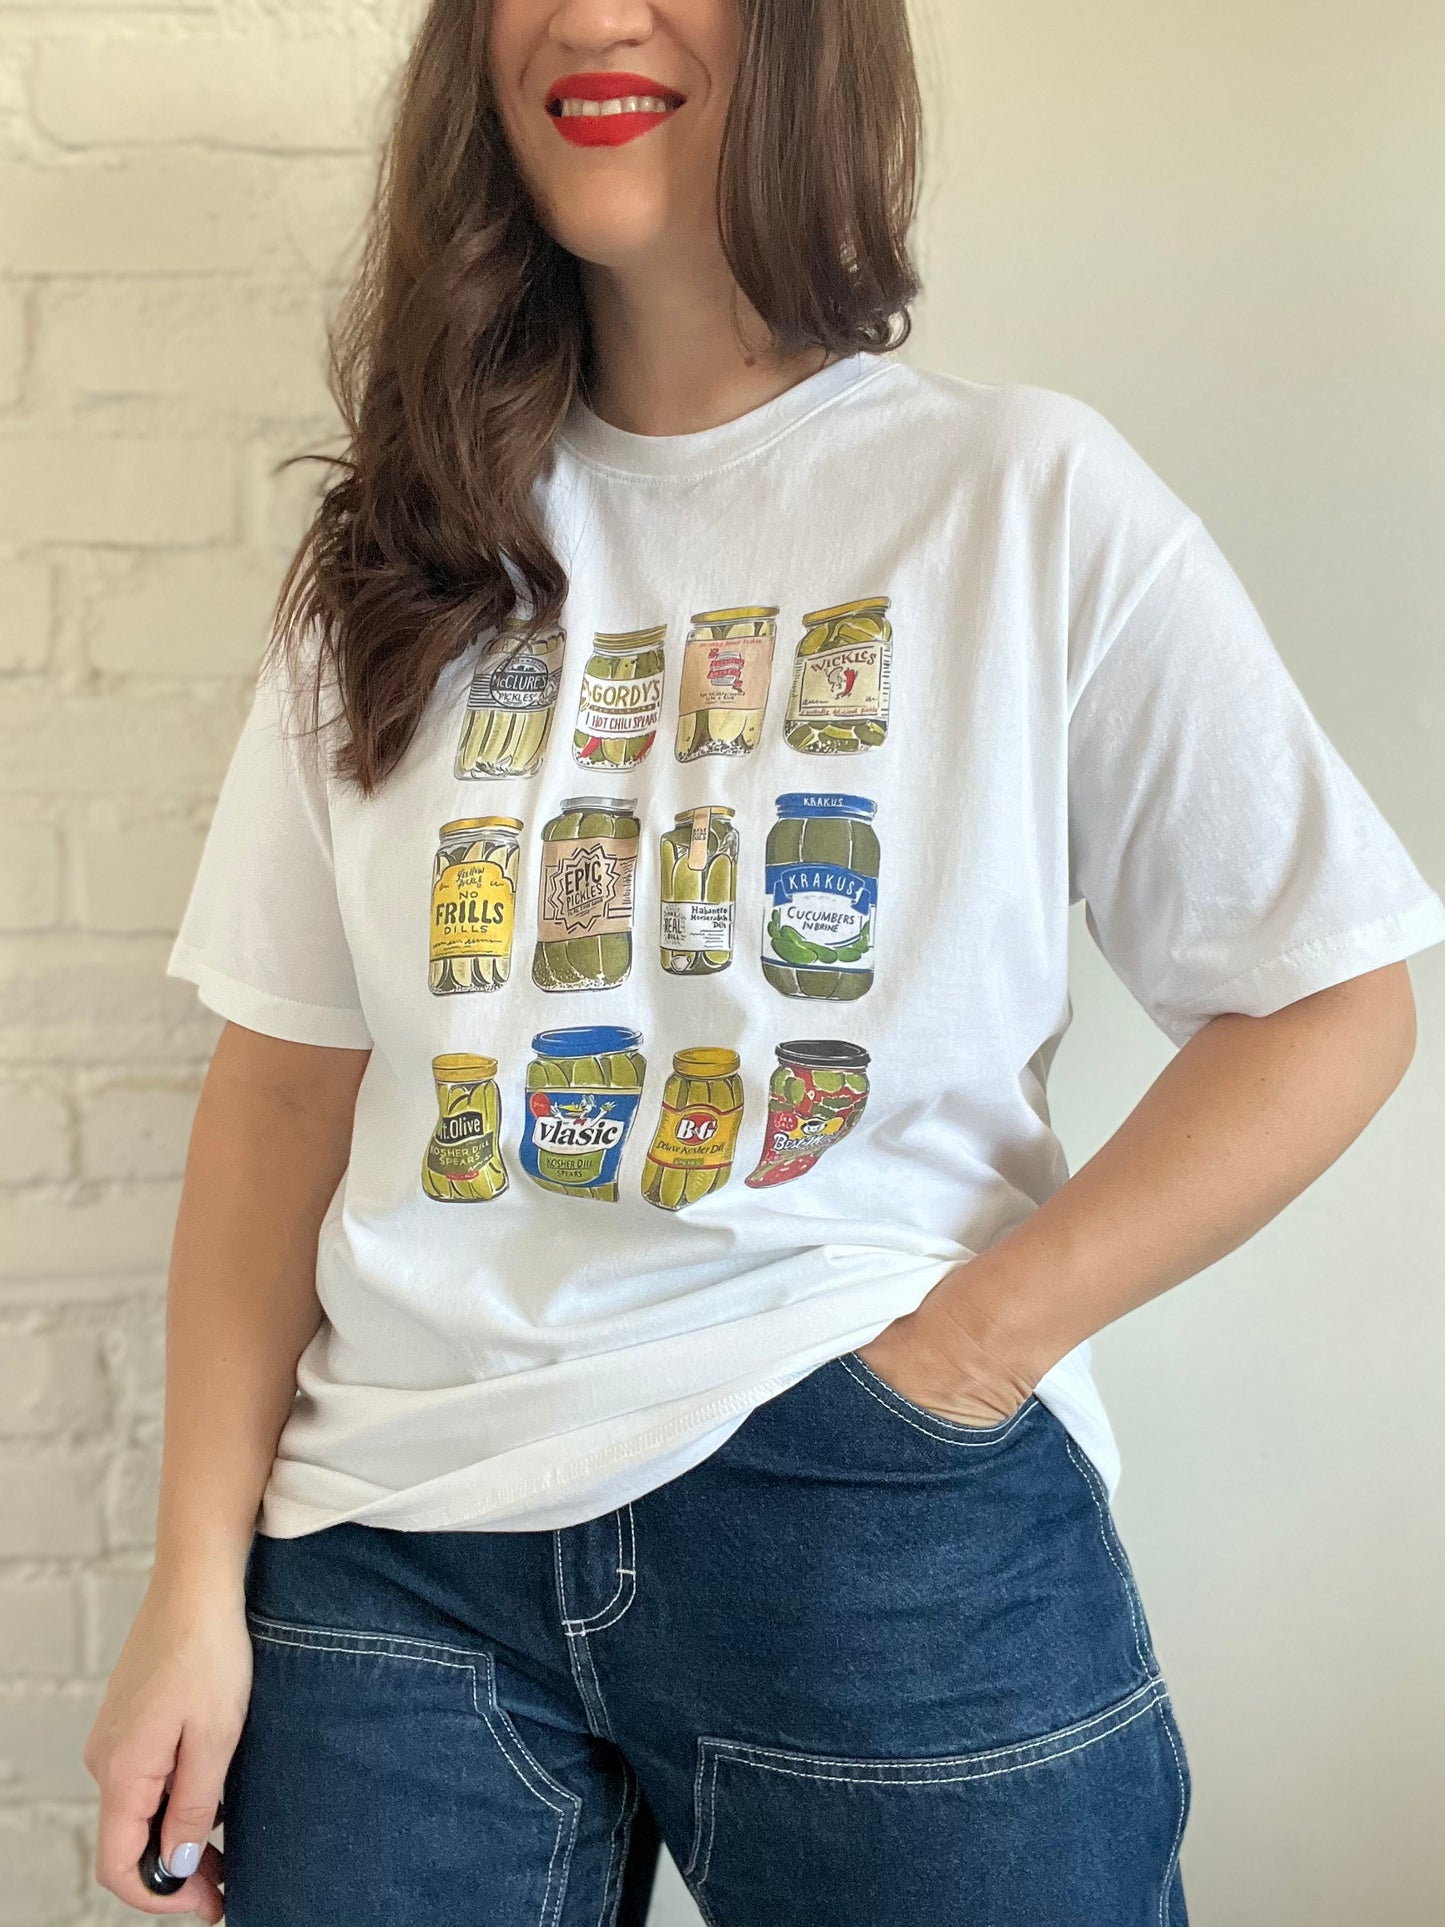 Pickles Variety T-Shirt - Size XL